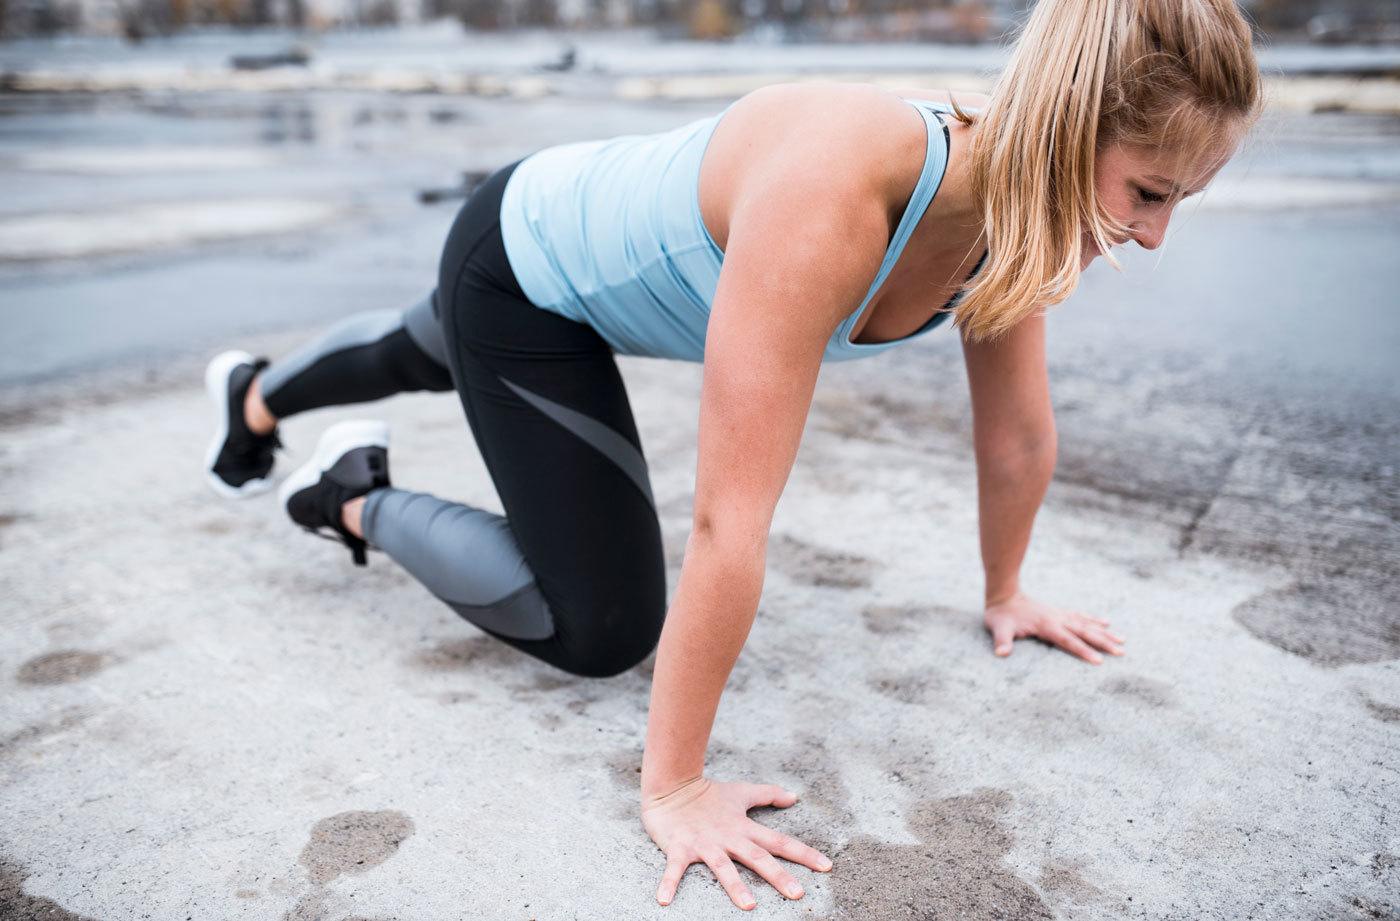 This is *by far* the most intense mountain climber exercise you’ll ever do